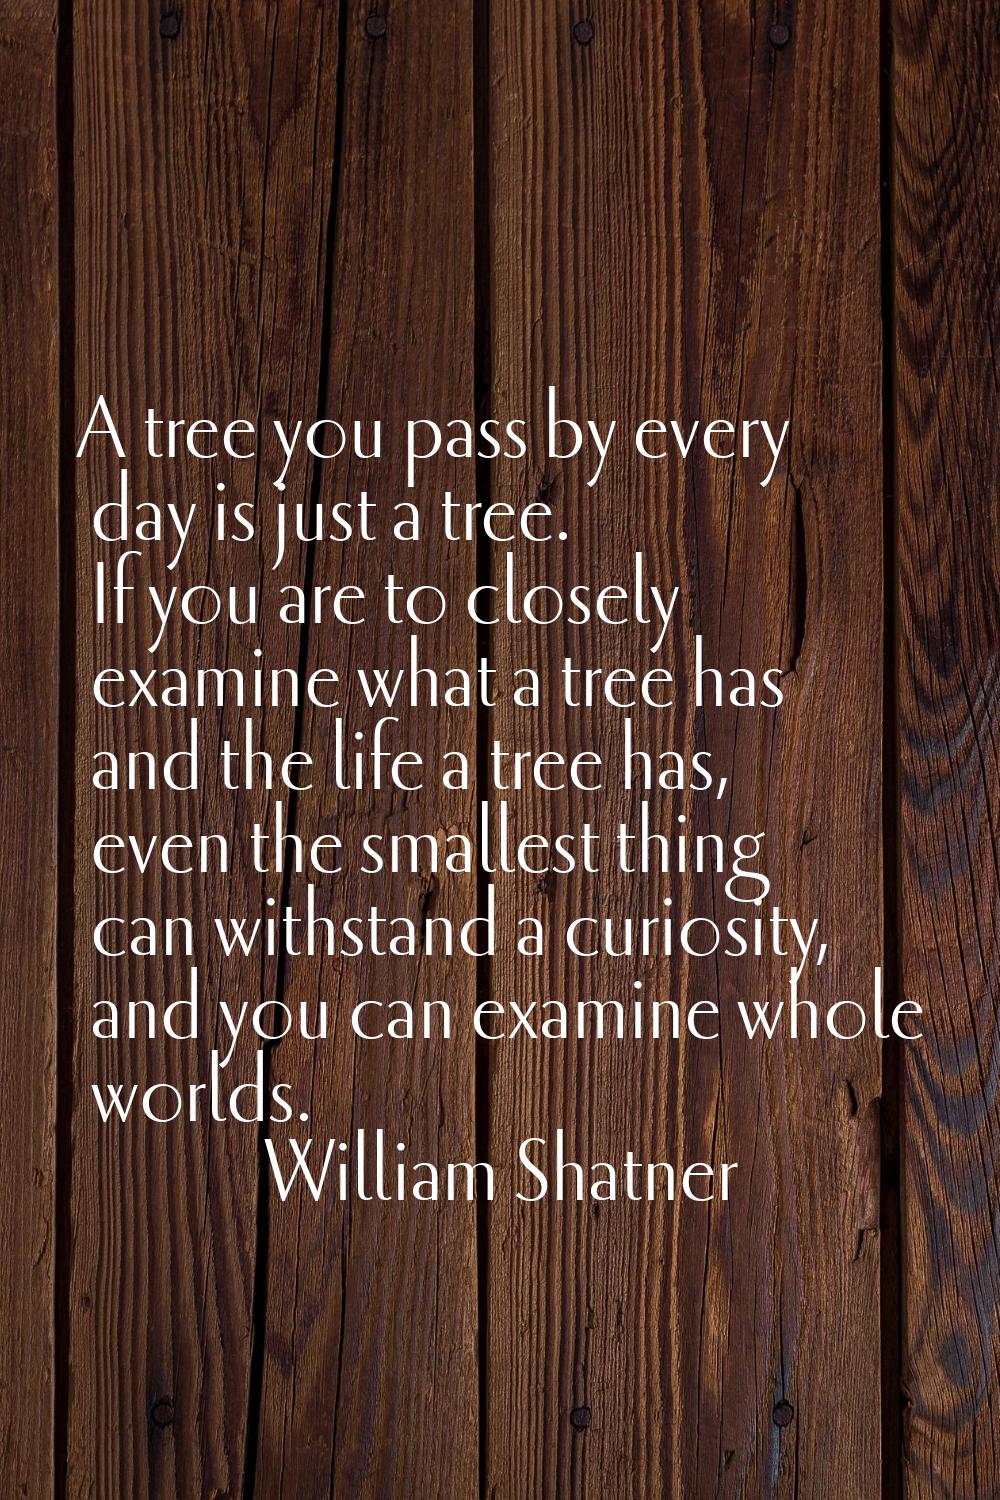 A tree you pass by every day is just a tree. If you are to closely examine what a tree has and the 